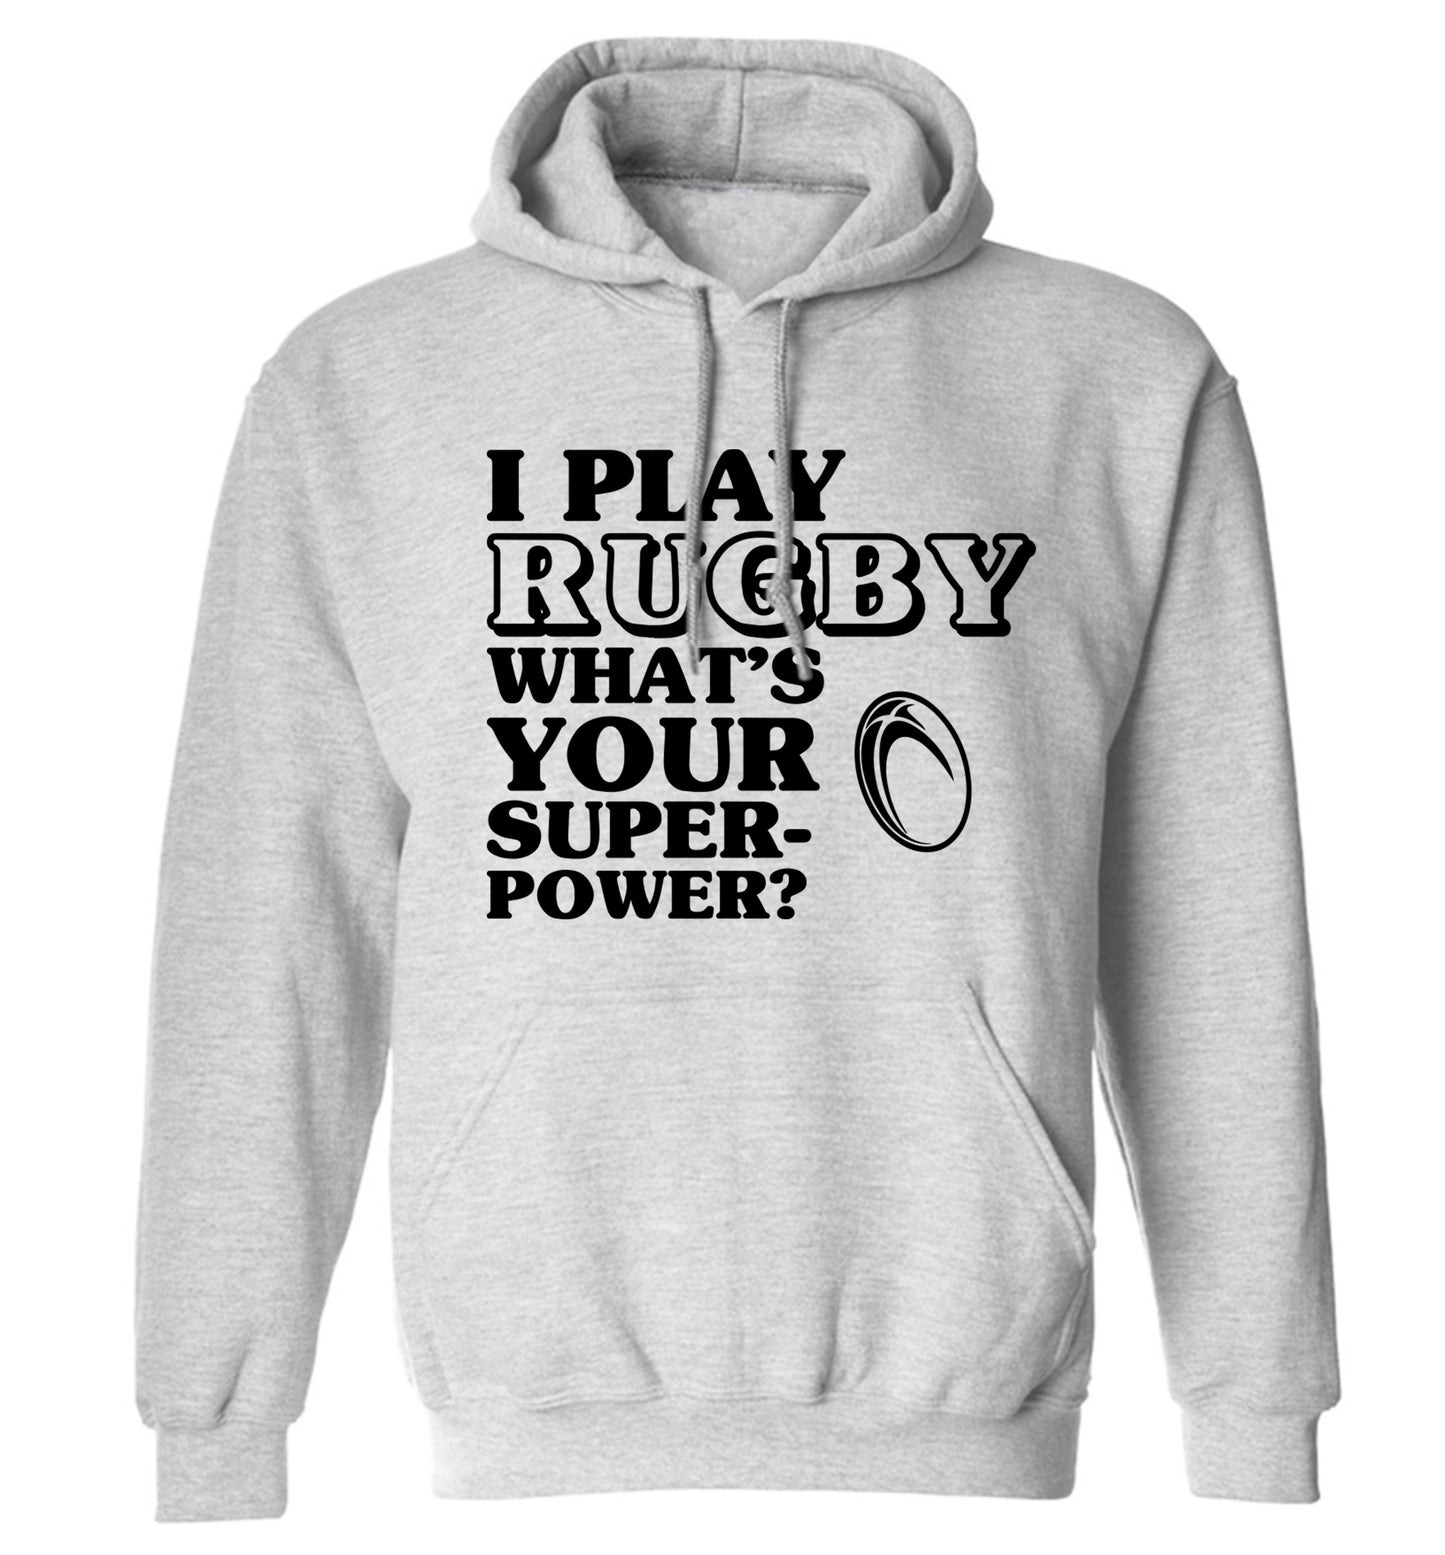 I play rugby what's your superpower? adults unisex grey hoodie 2XL